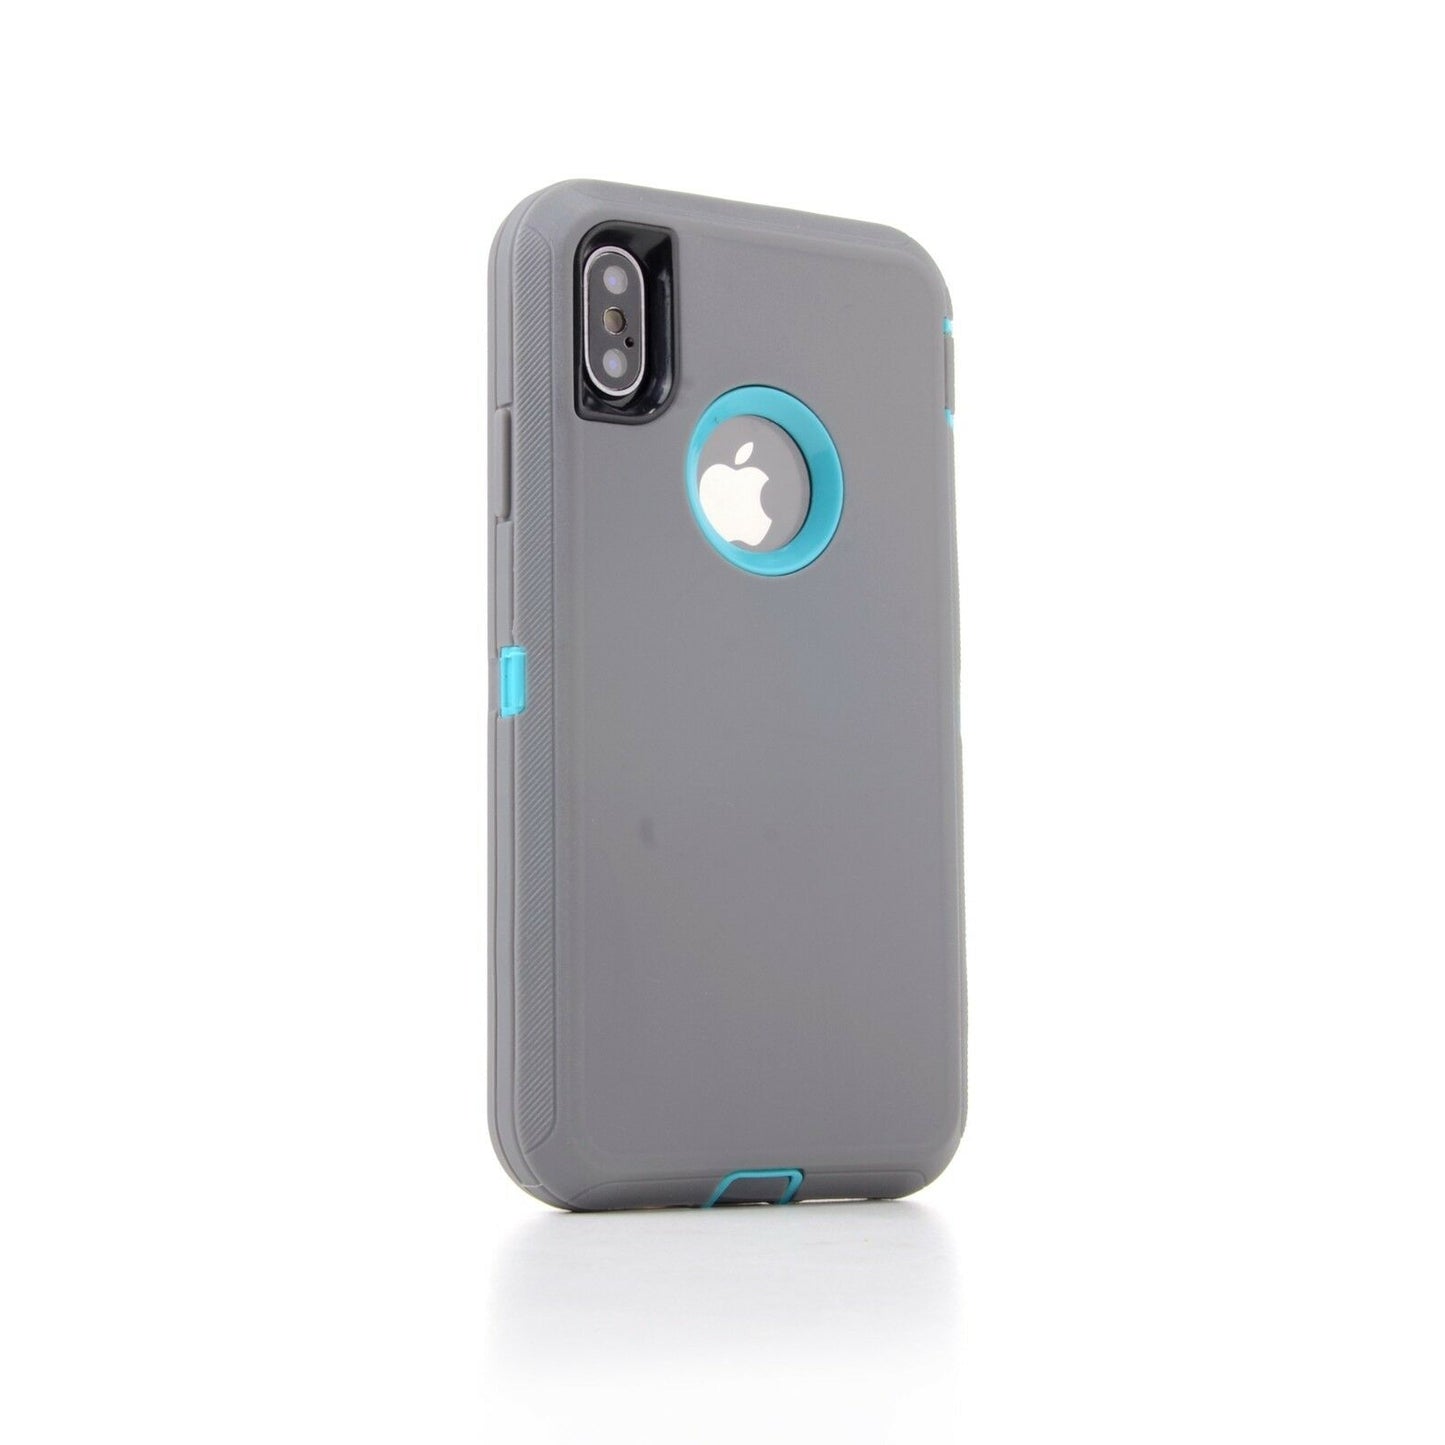 Case Hybrid Heavy Duty Shockproof Rubber For iPhone Se/6/Plus - carolay.co